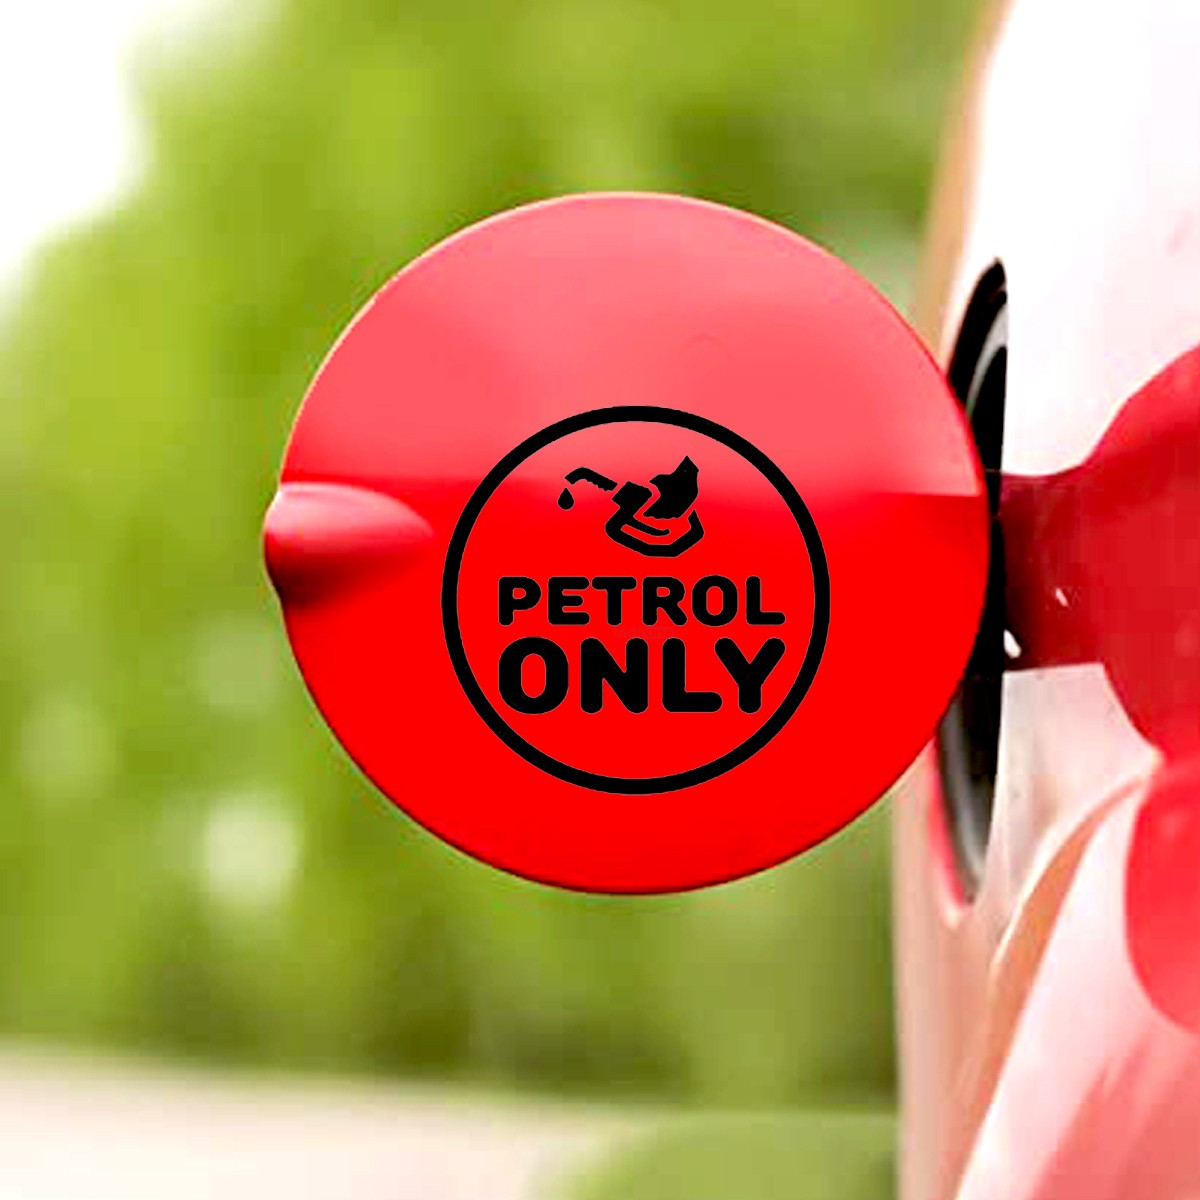 indnone®  Petrol Only Pipe Logo Sticker for Car. Car Sticker Stylish Fuel Lid | Black Color Standard Size